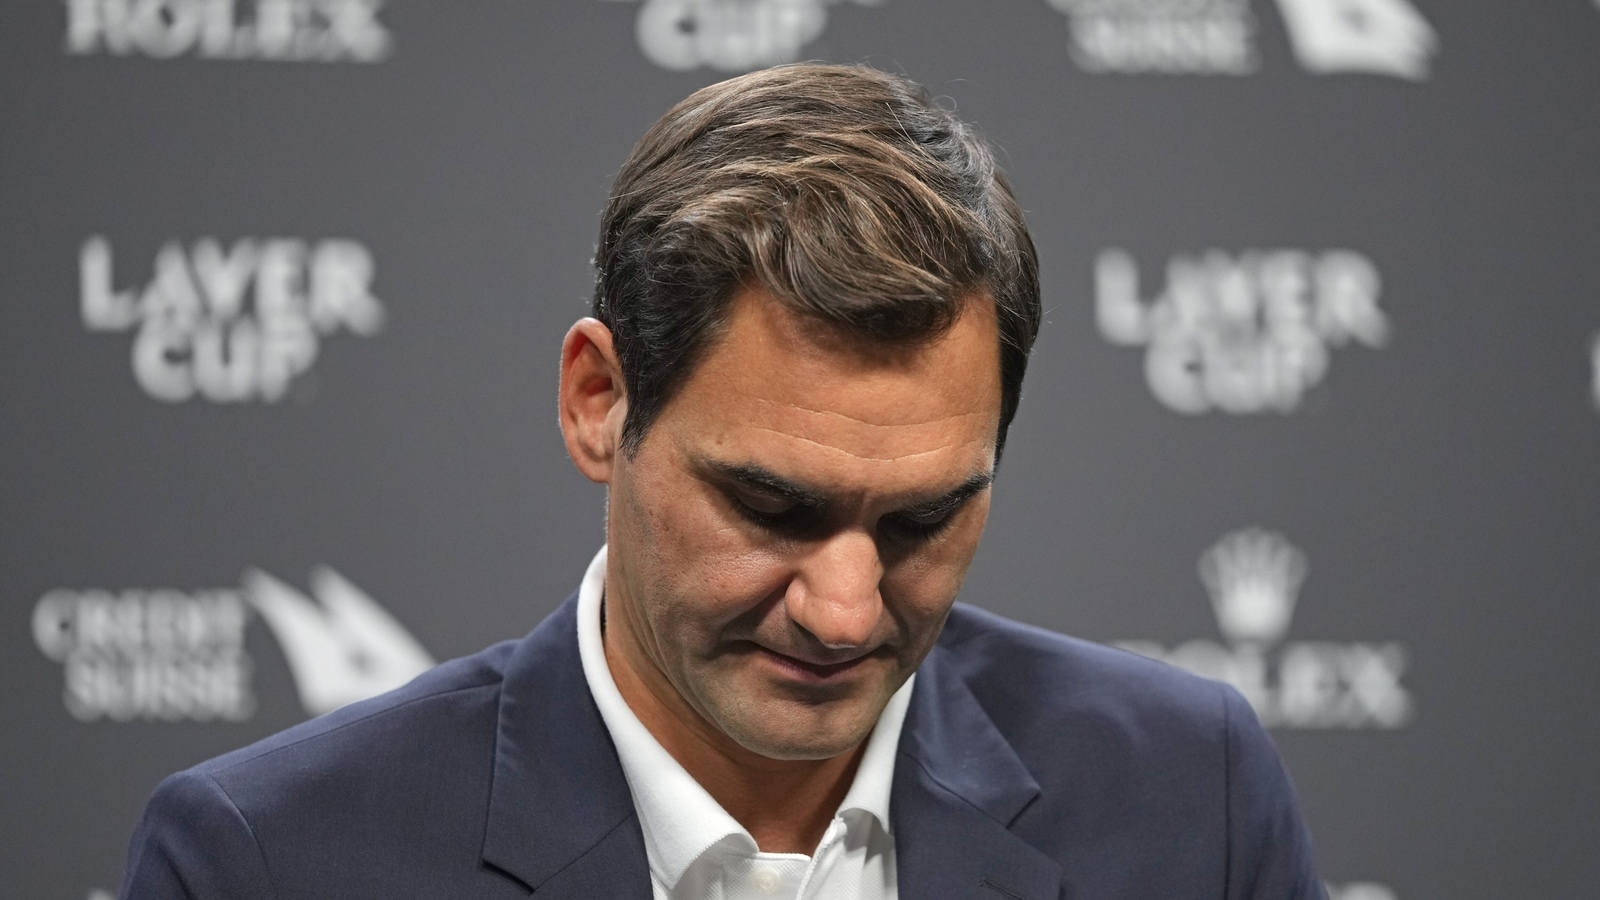 scan-result-wasn-t-what-i-wanted-it-to-be-roger-federer-reveals-painful-details-leading-to-retirement-decision